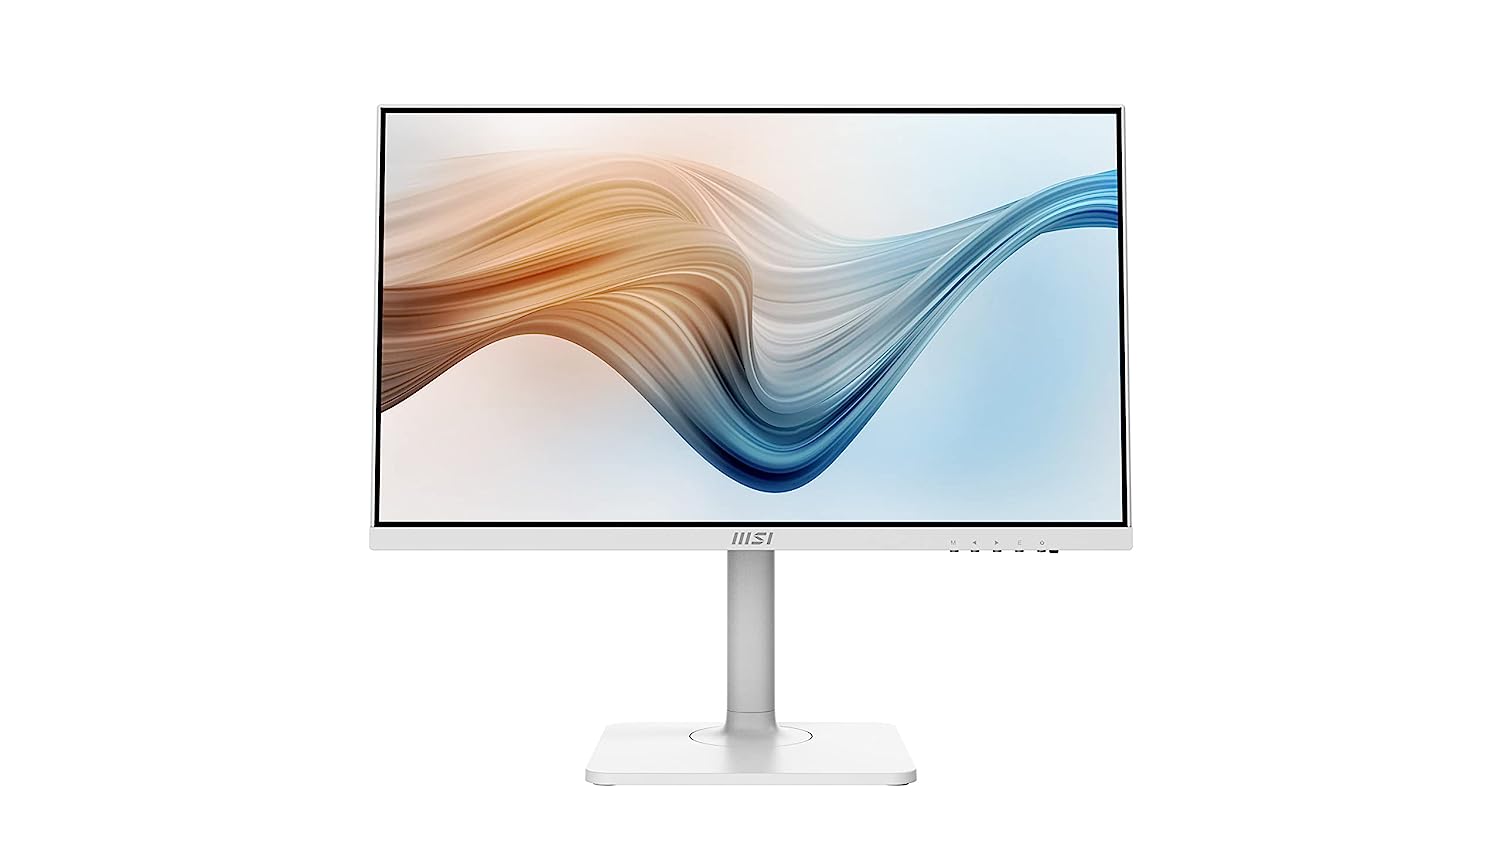 MSI Modern MD241PW 24 Inch 1920 x 1080 Pixels Computer Monitor, Full HD, 75Hz, IPS, HDMI, Type C, Adjustable Stand, Speakers-White